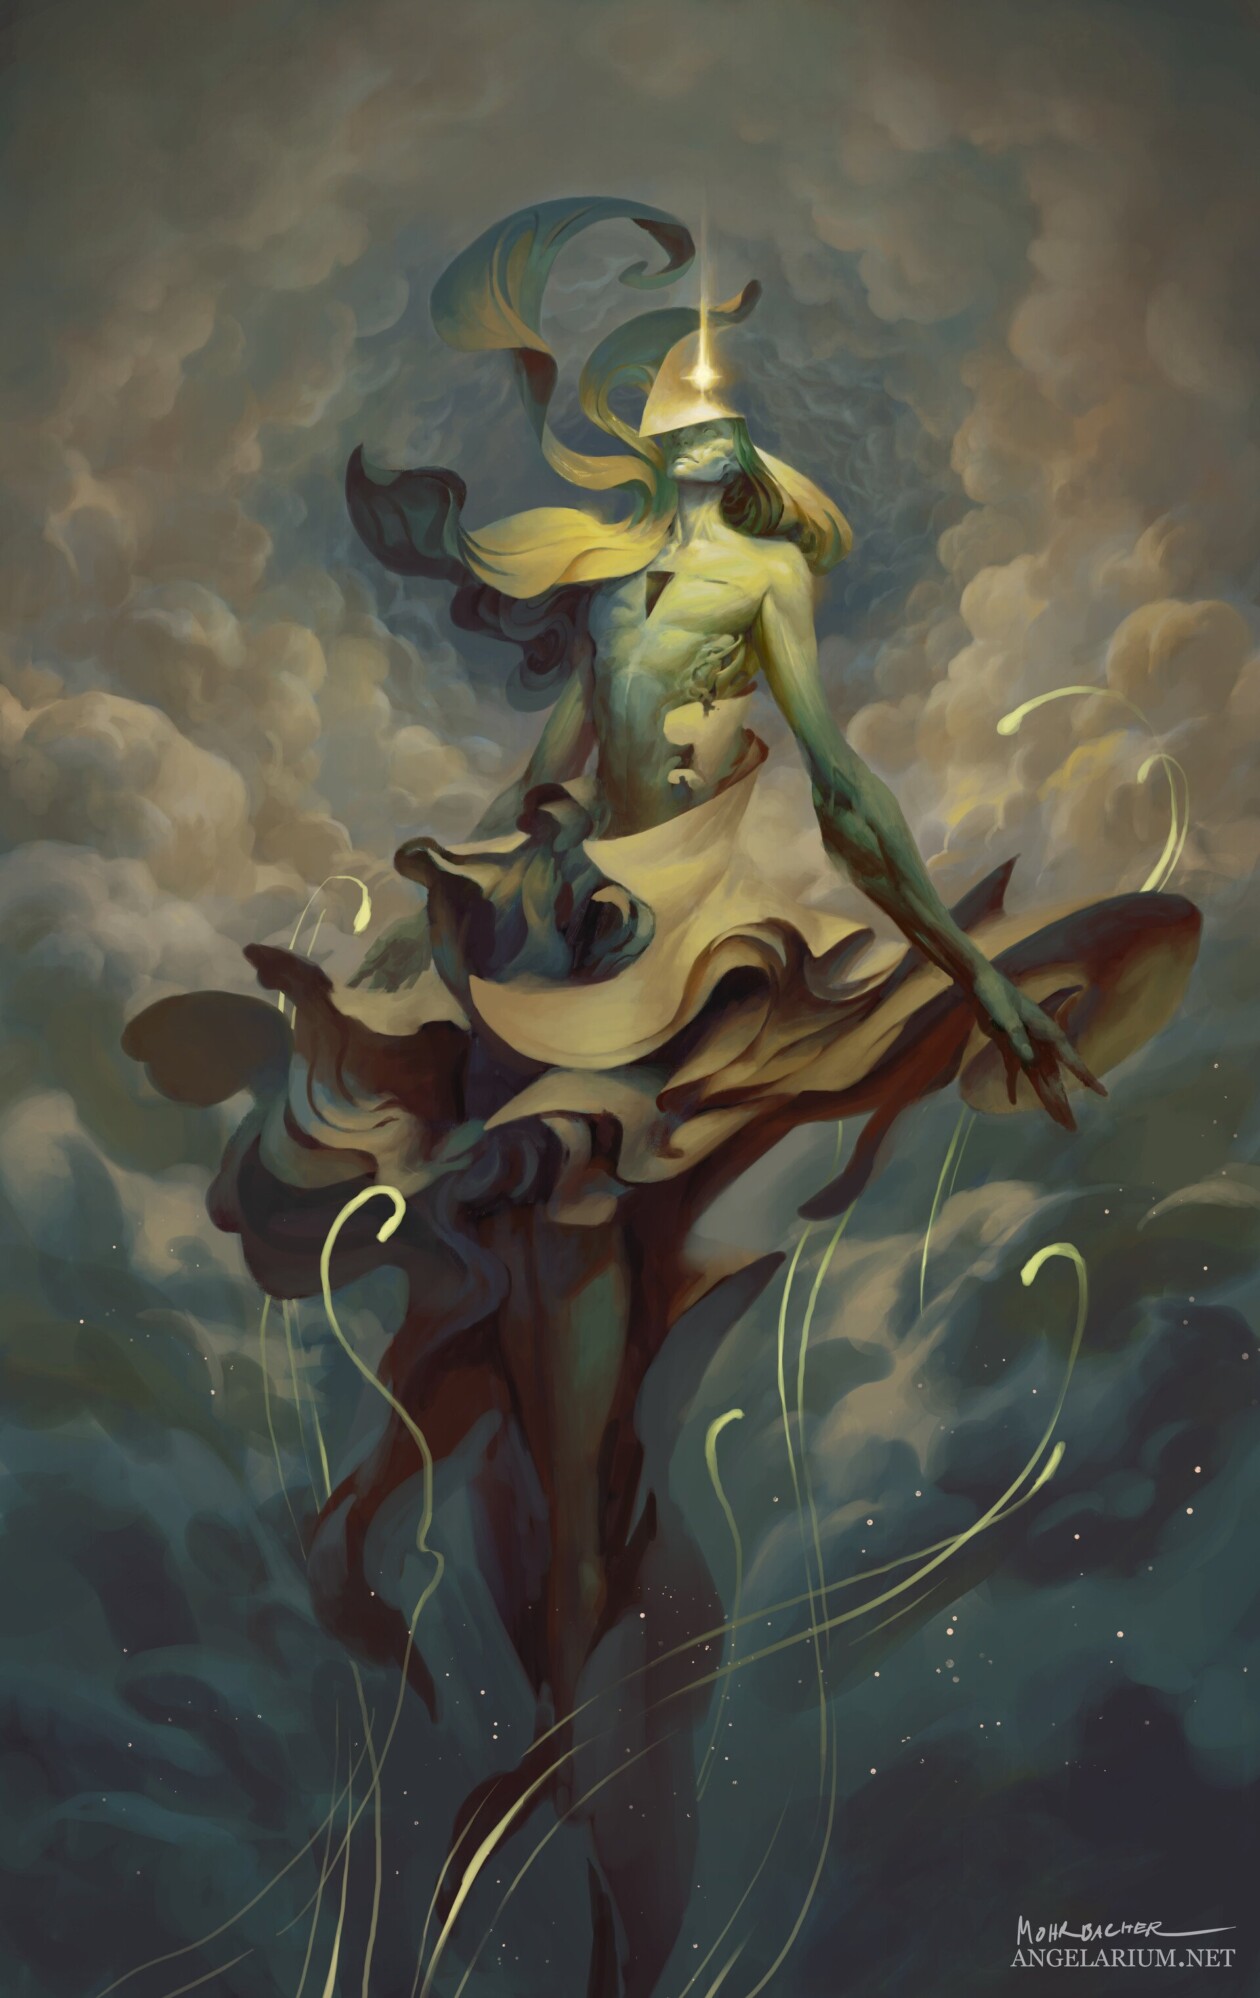 Peter Mohrbacher Blends Surrealism With Fantasy To Create Powerful Magical Beings (5)